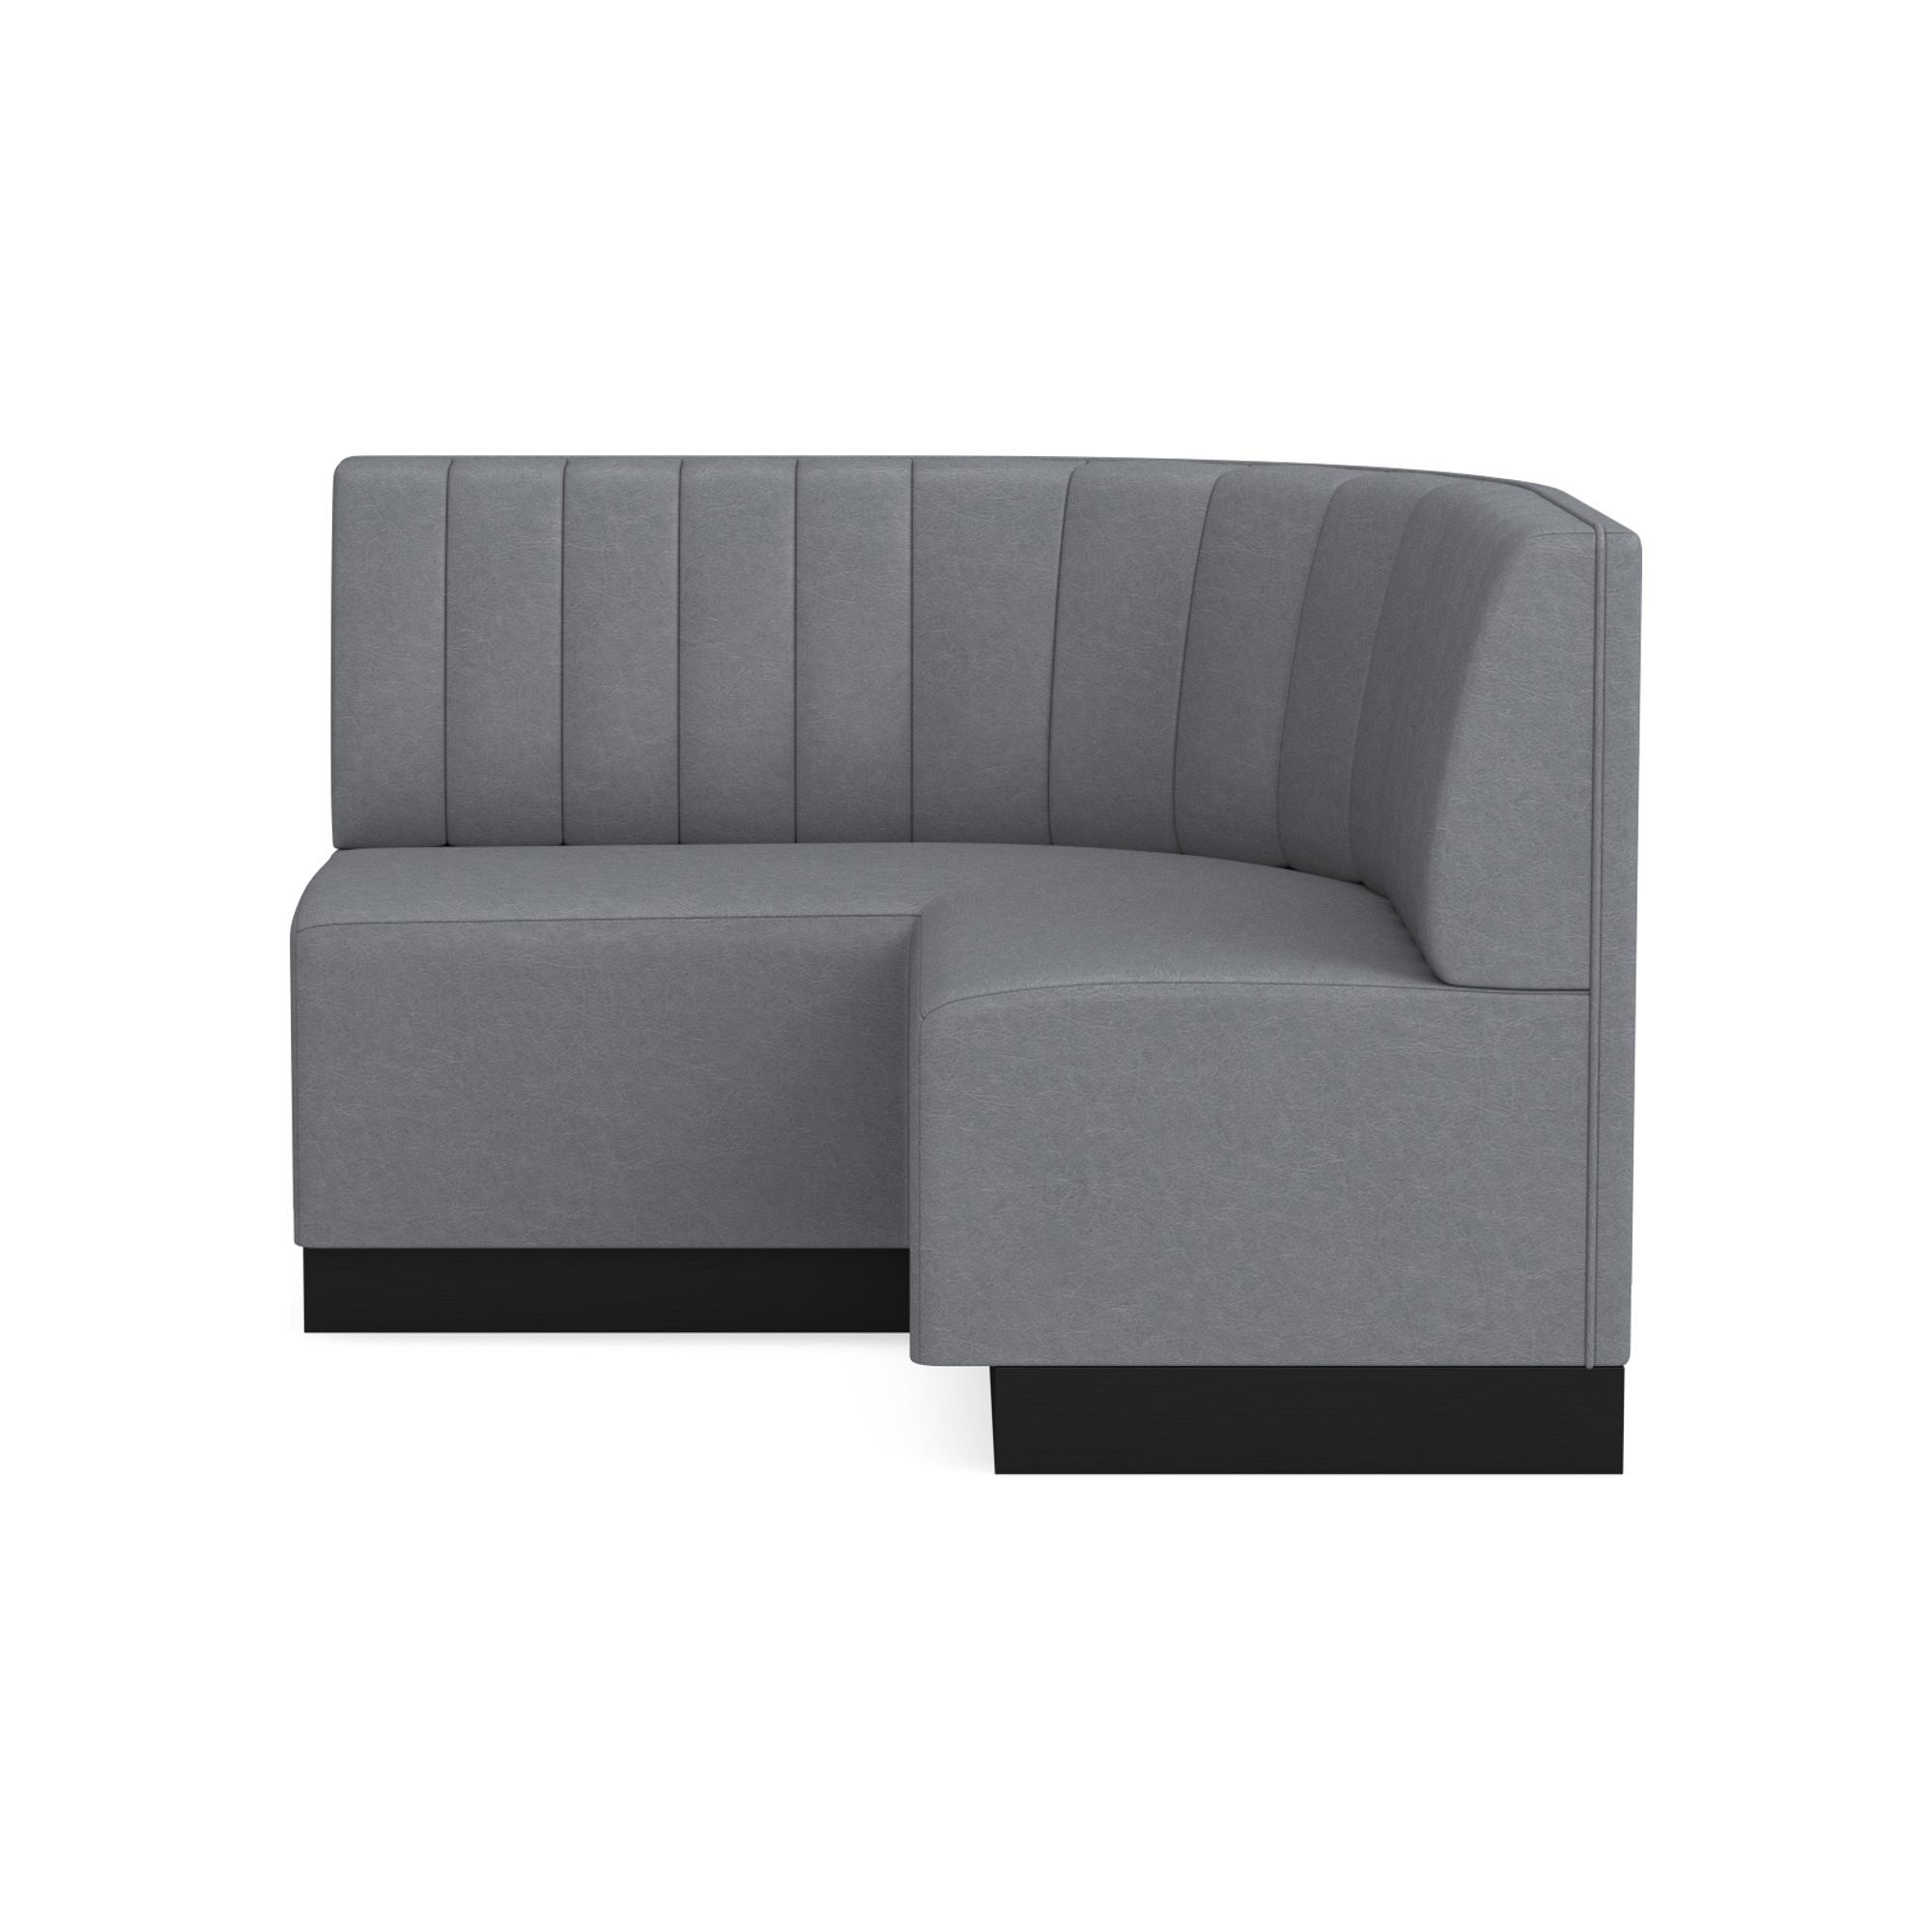 OPEN BOX: Garbo Leather Customizable Banquette – Vertical Tufting